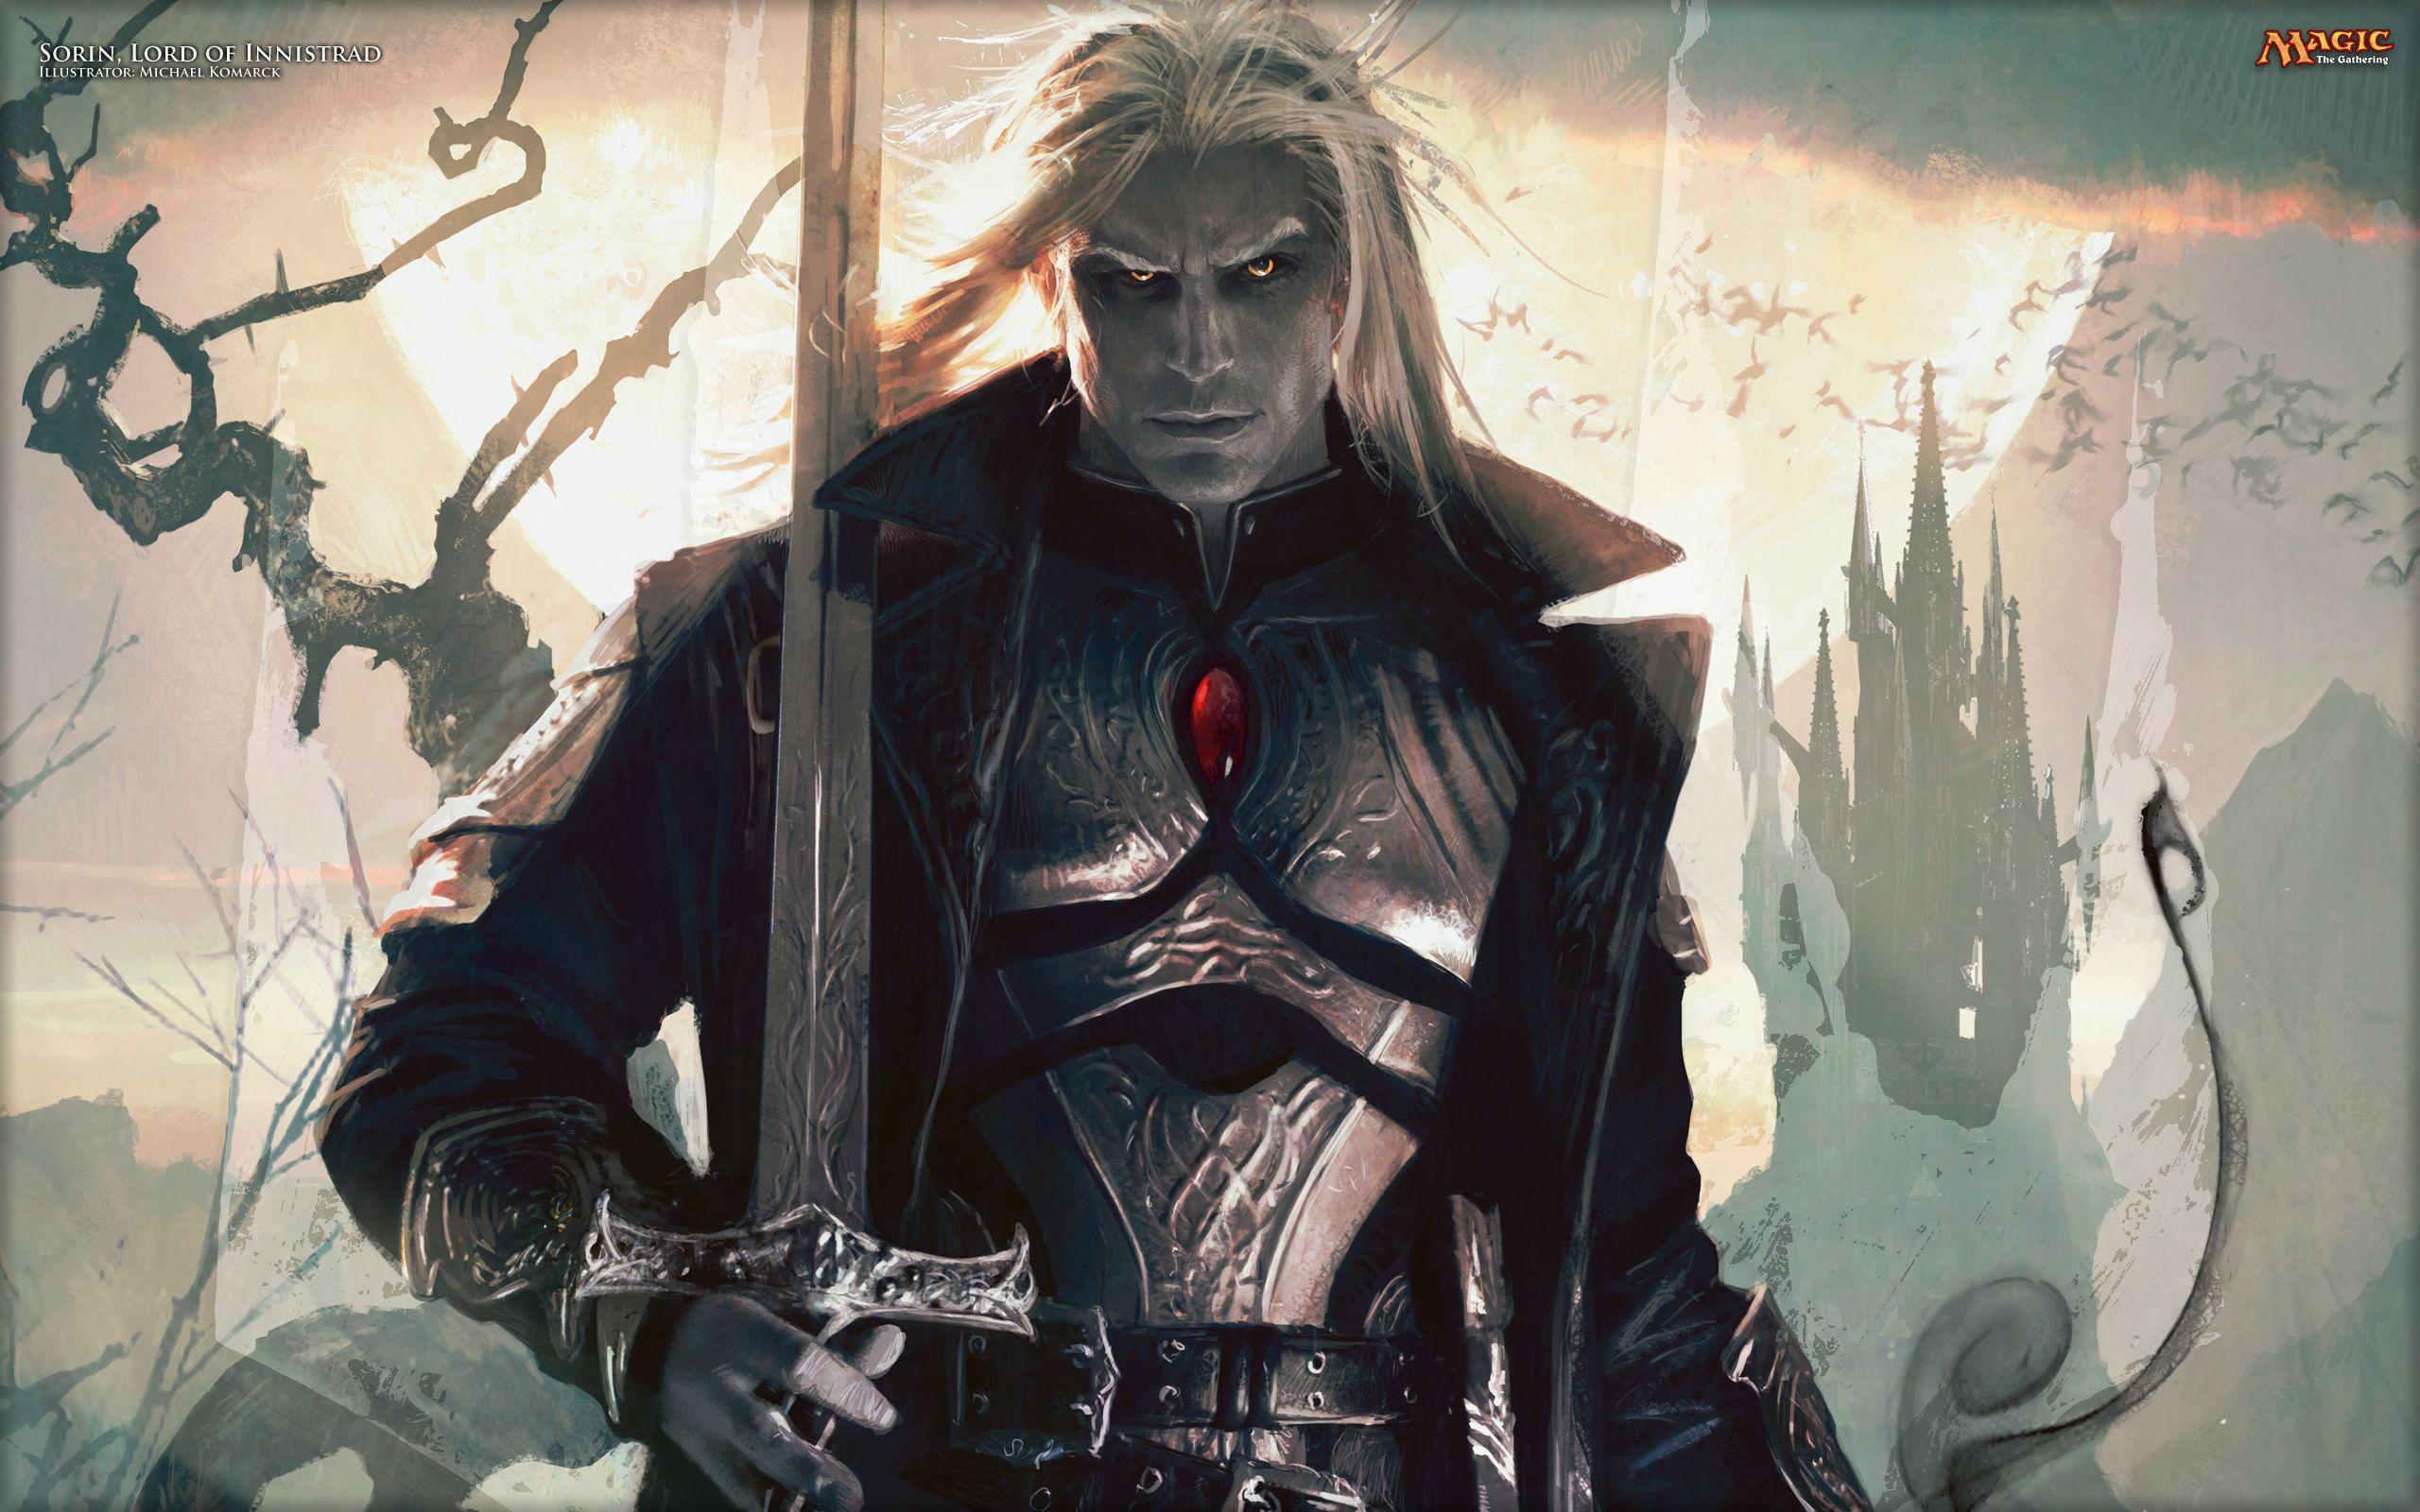 Wallpaper of the Week: Sorin, Lord of Innistrad. MAGIC: THE GATHERING